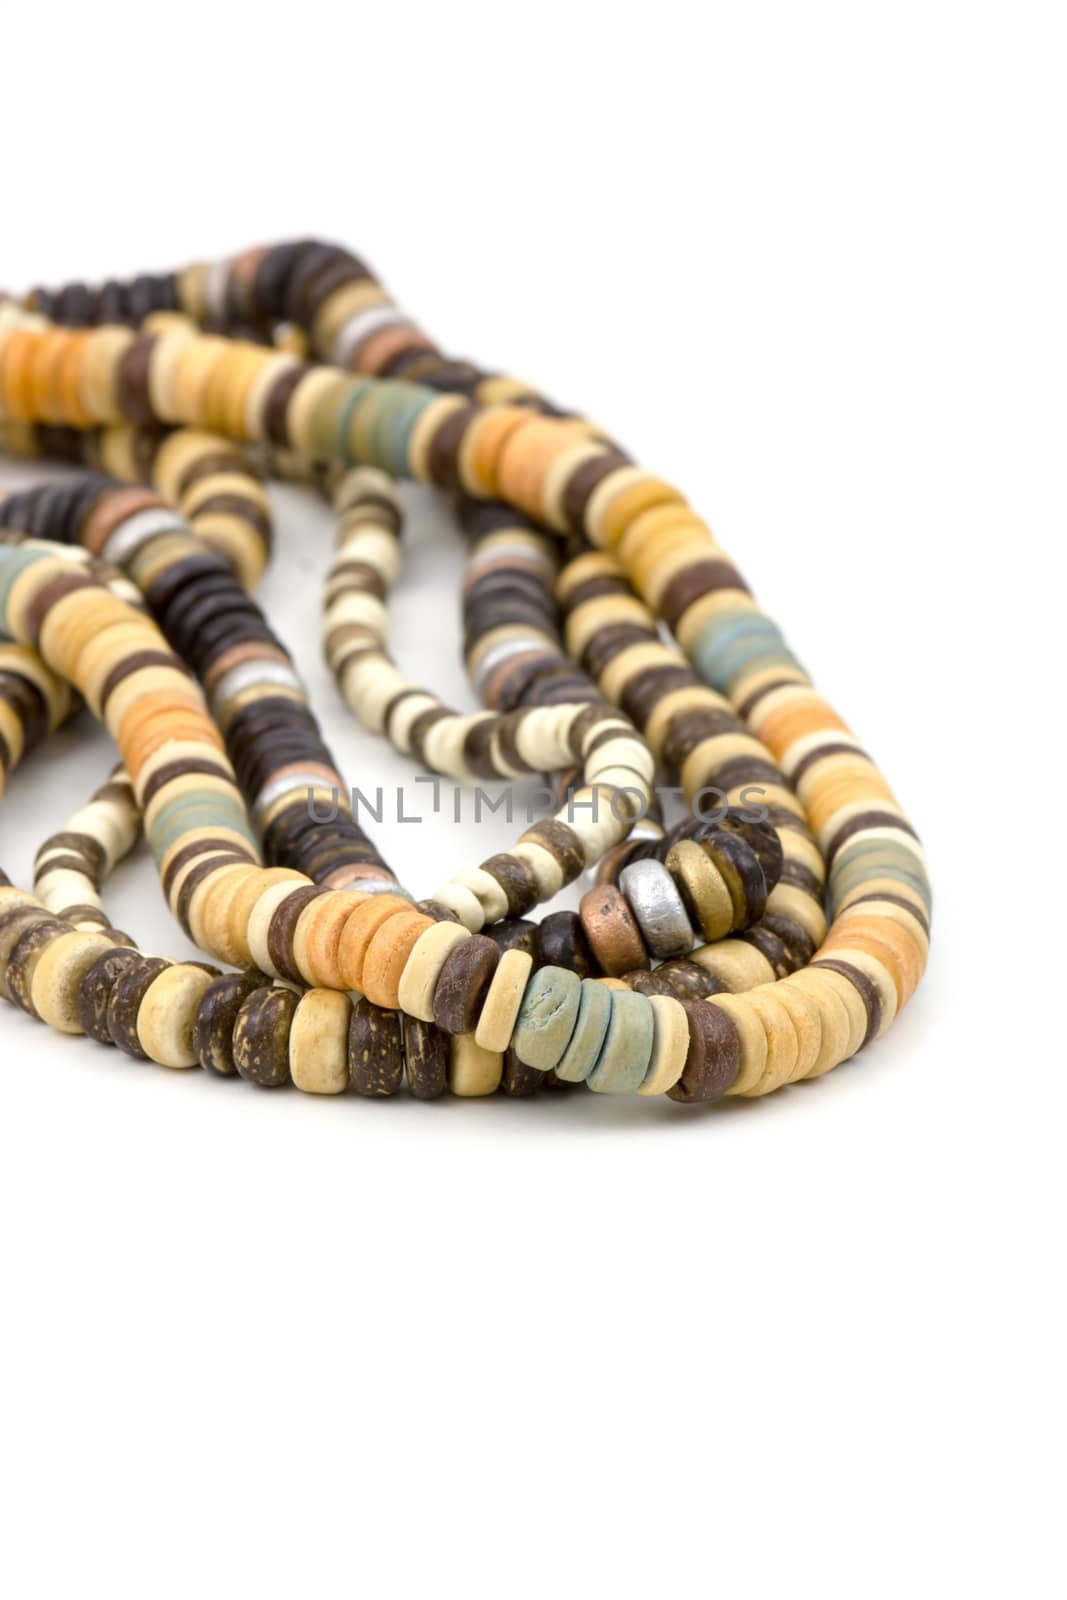 necklaces of alabaster beads by miradrozdowski